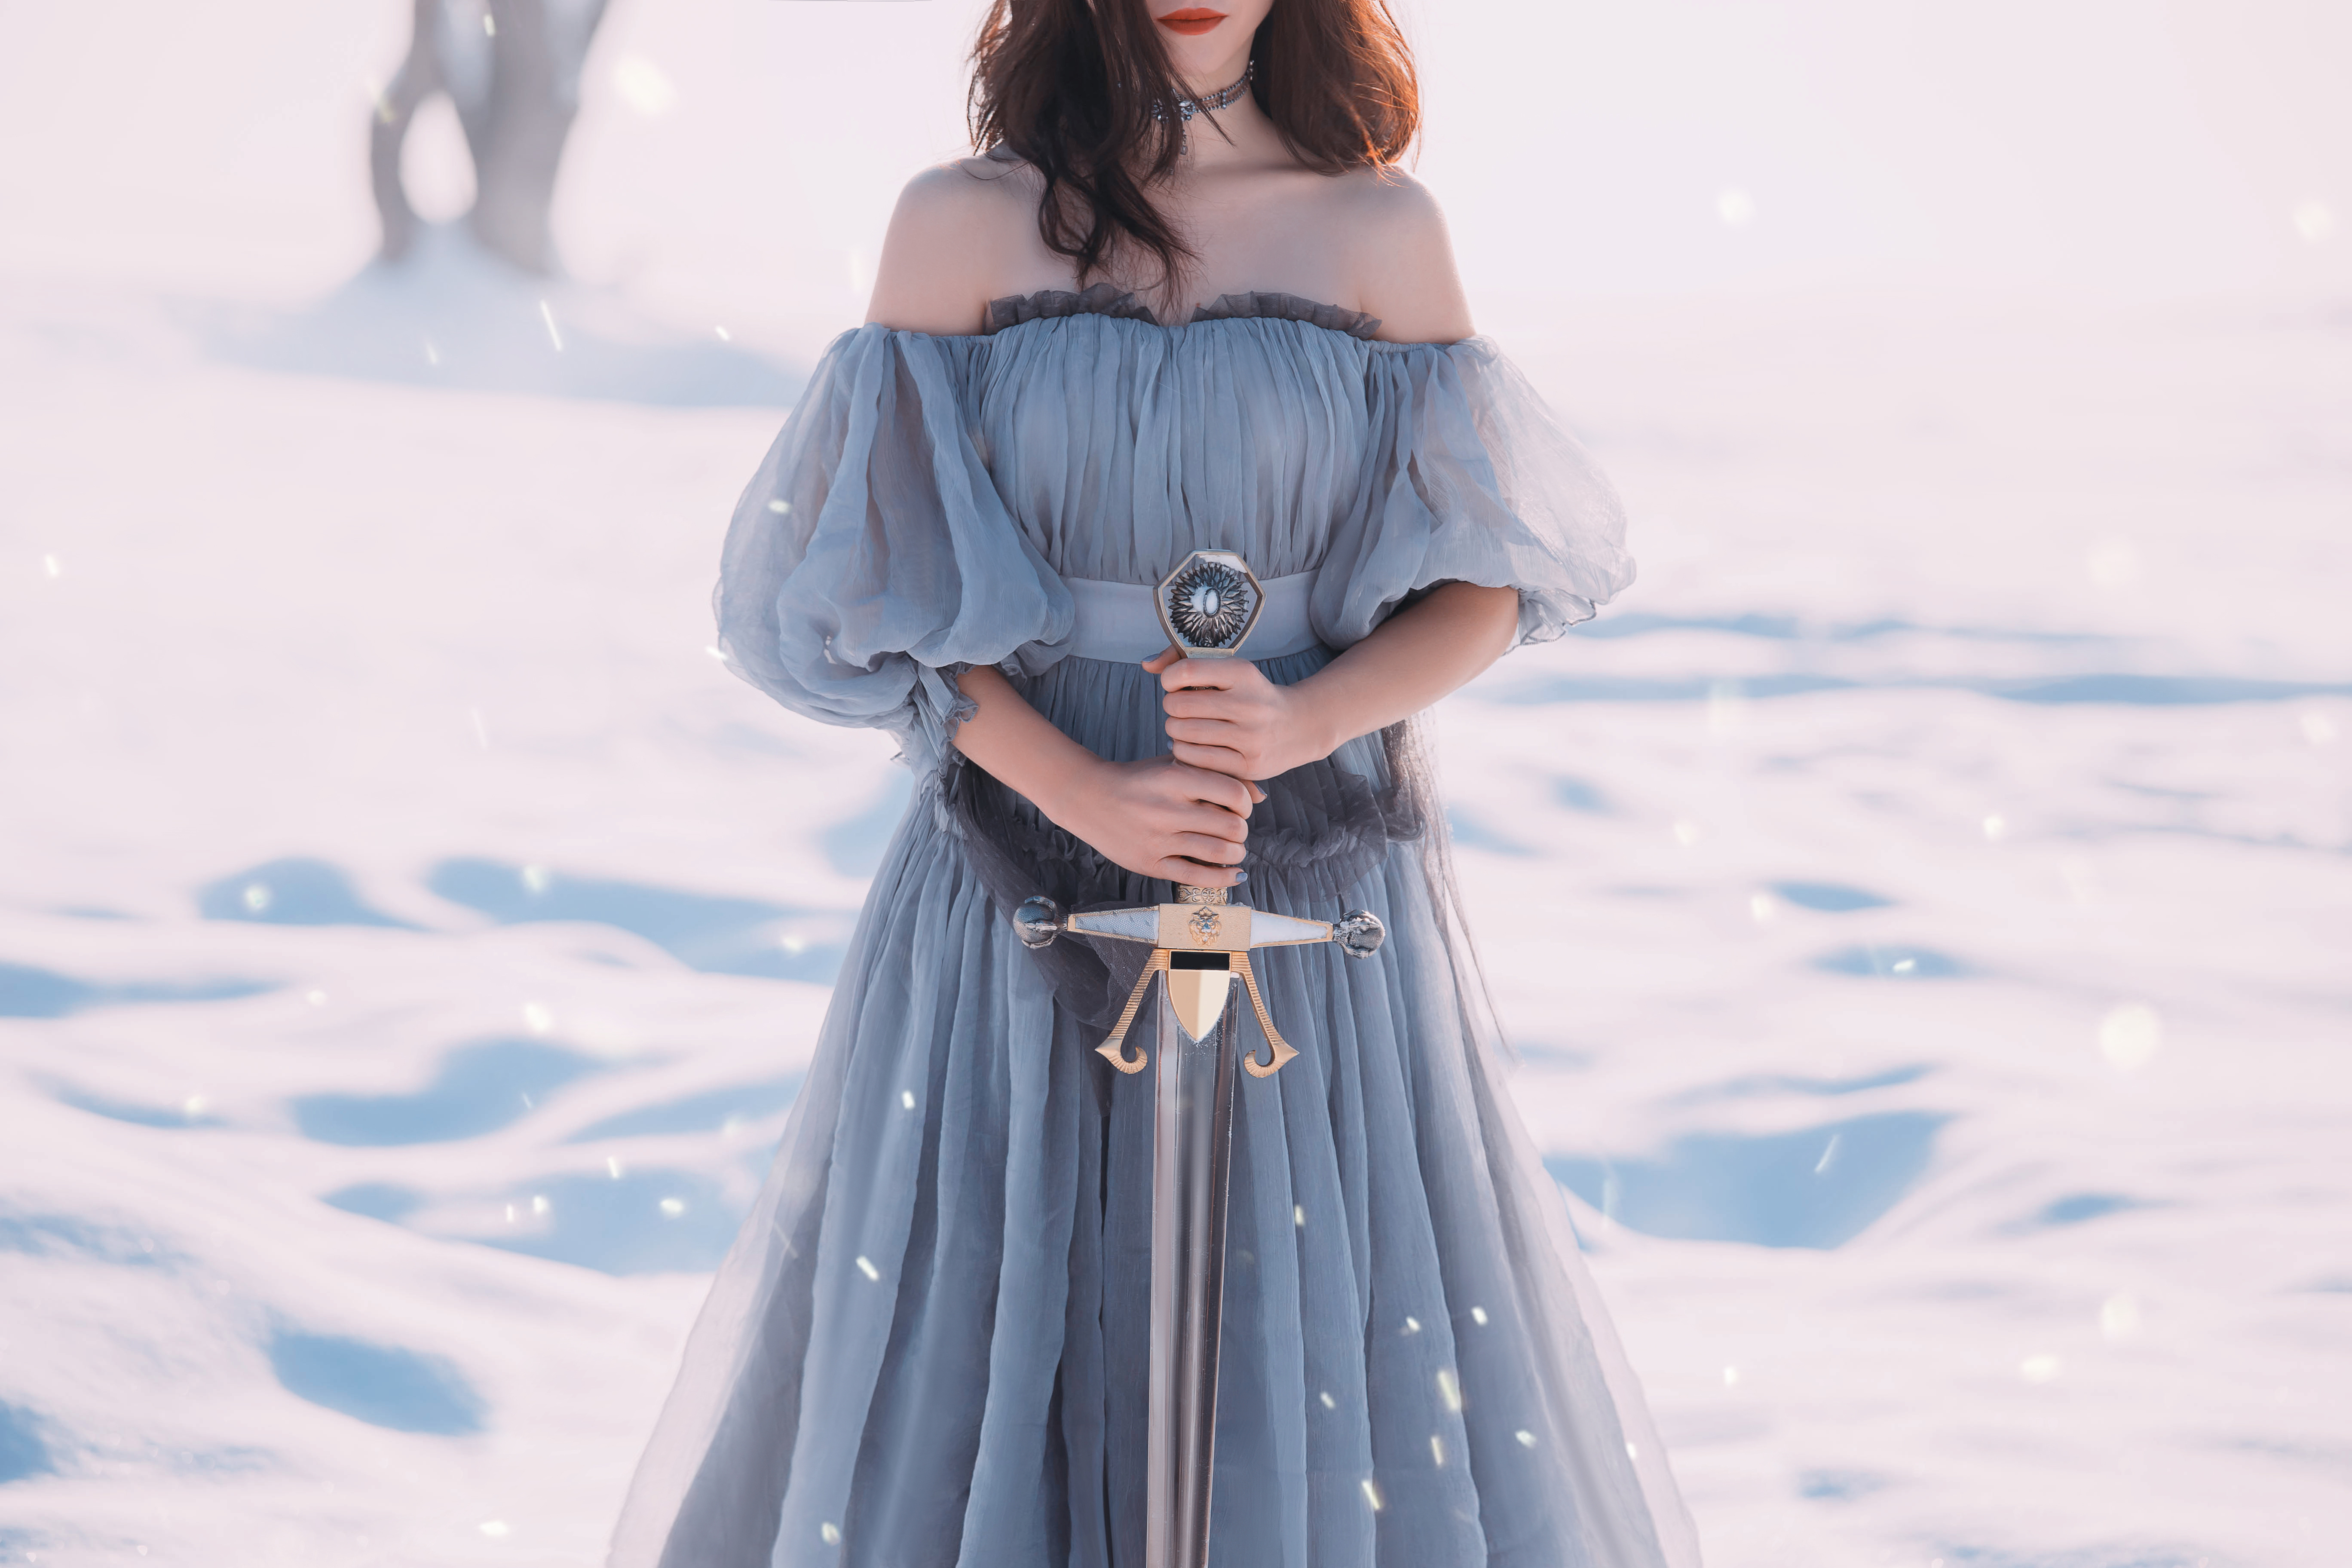 lady holding a sharp silver sword in hands standing in the snow